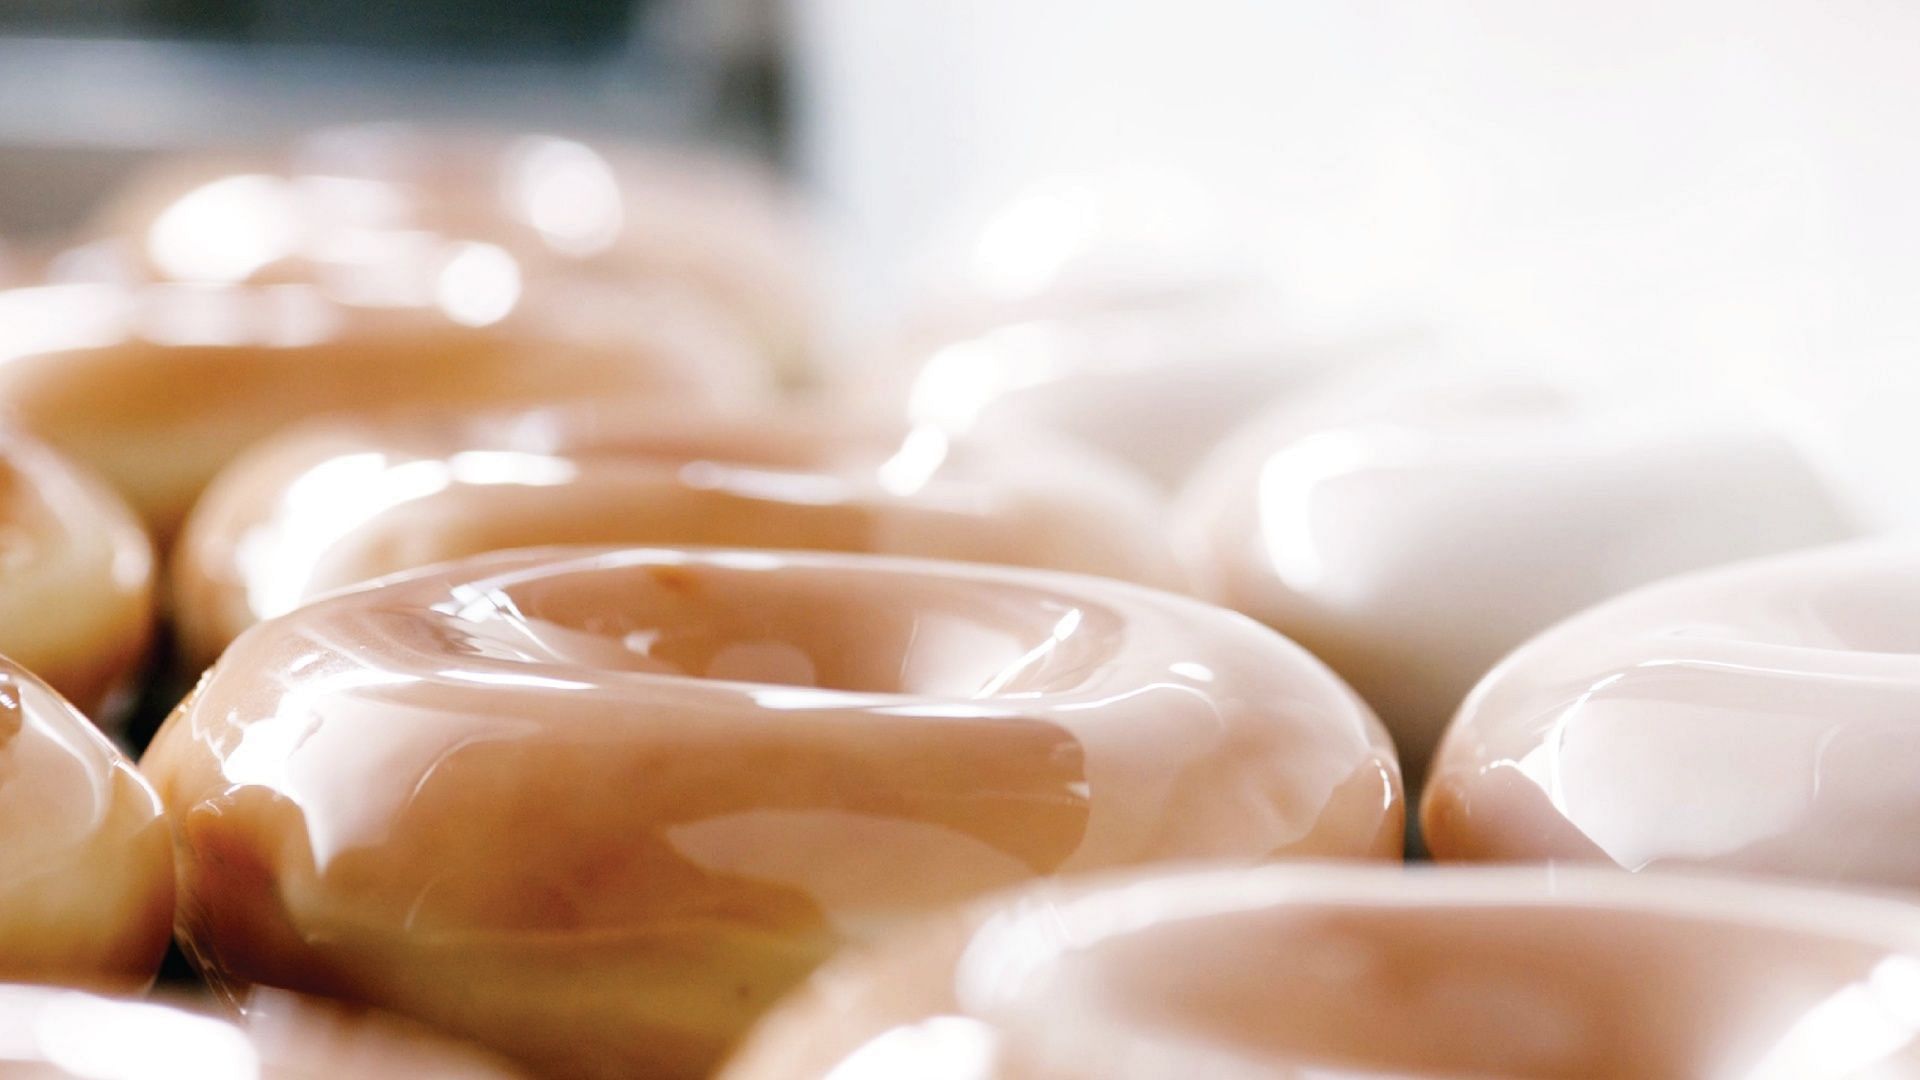 The 86-cent Original Glazed&reg; dozens deal can be claimed at all participating stores across the United States on July 14 on the purchase of any dozen doughnuts at the regular price (Image via Krispy Kreme)